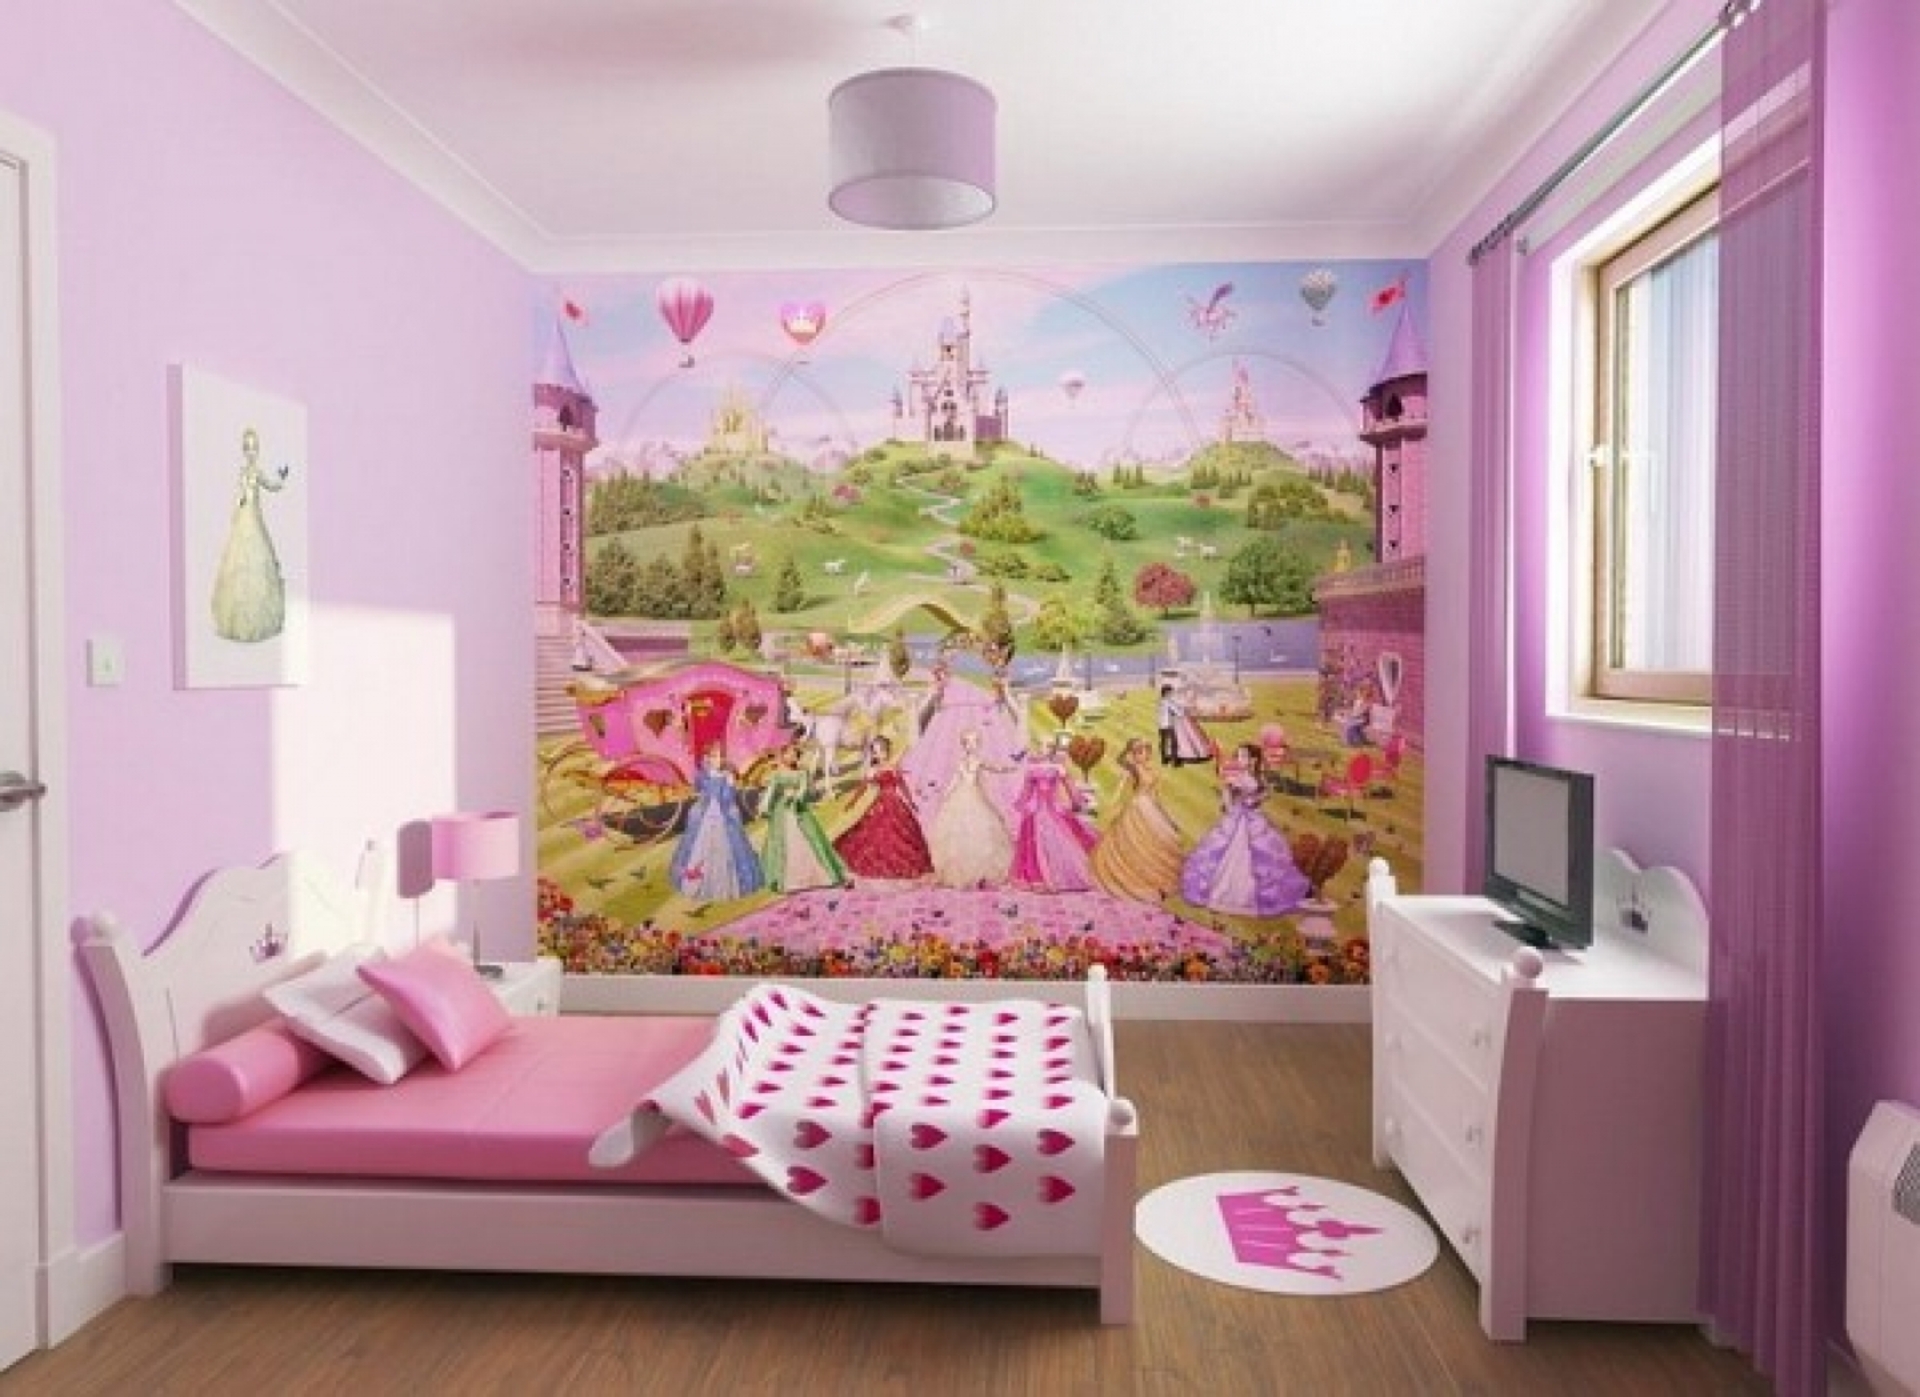 The design of the children's room for the boy with themed stylish wallpaper